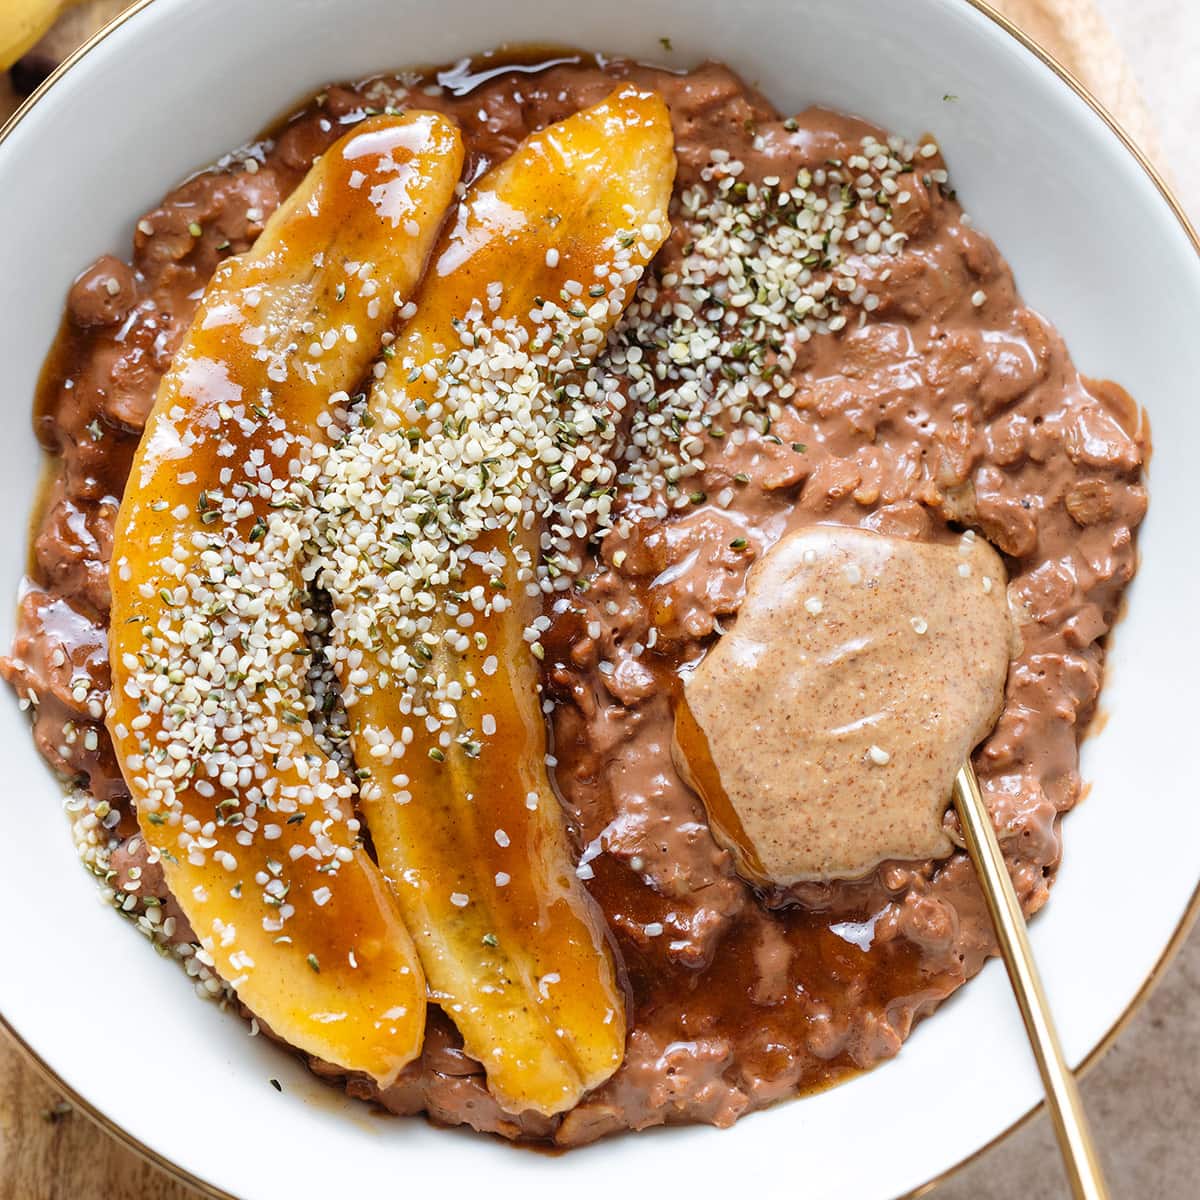 Chocolate coffee oatmeal in a white bowl topped with caramelized banana, almond butter, and hemp seeds with a gold spoon inserted on the right.